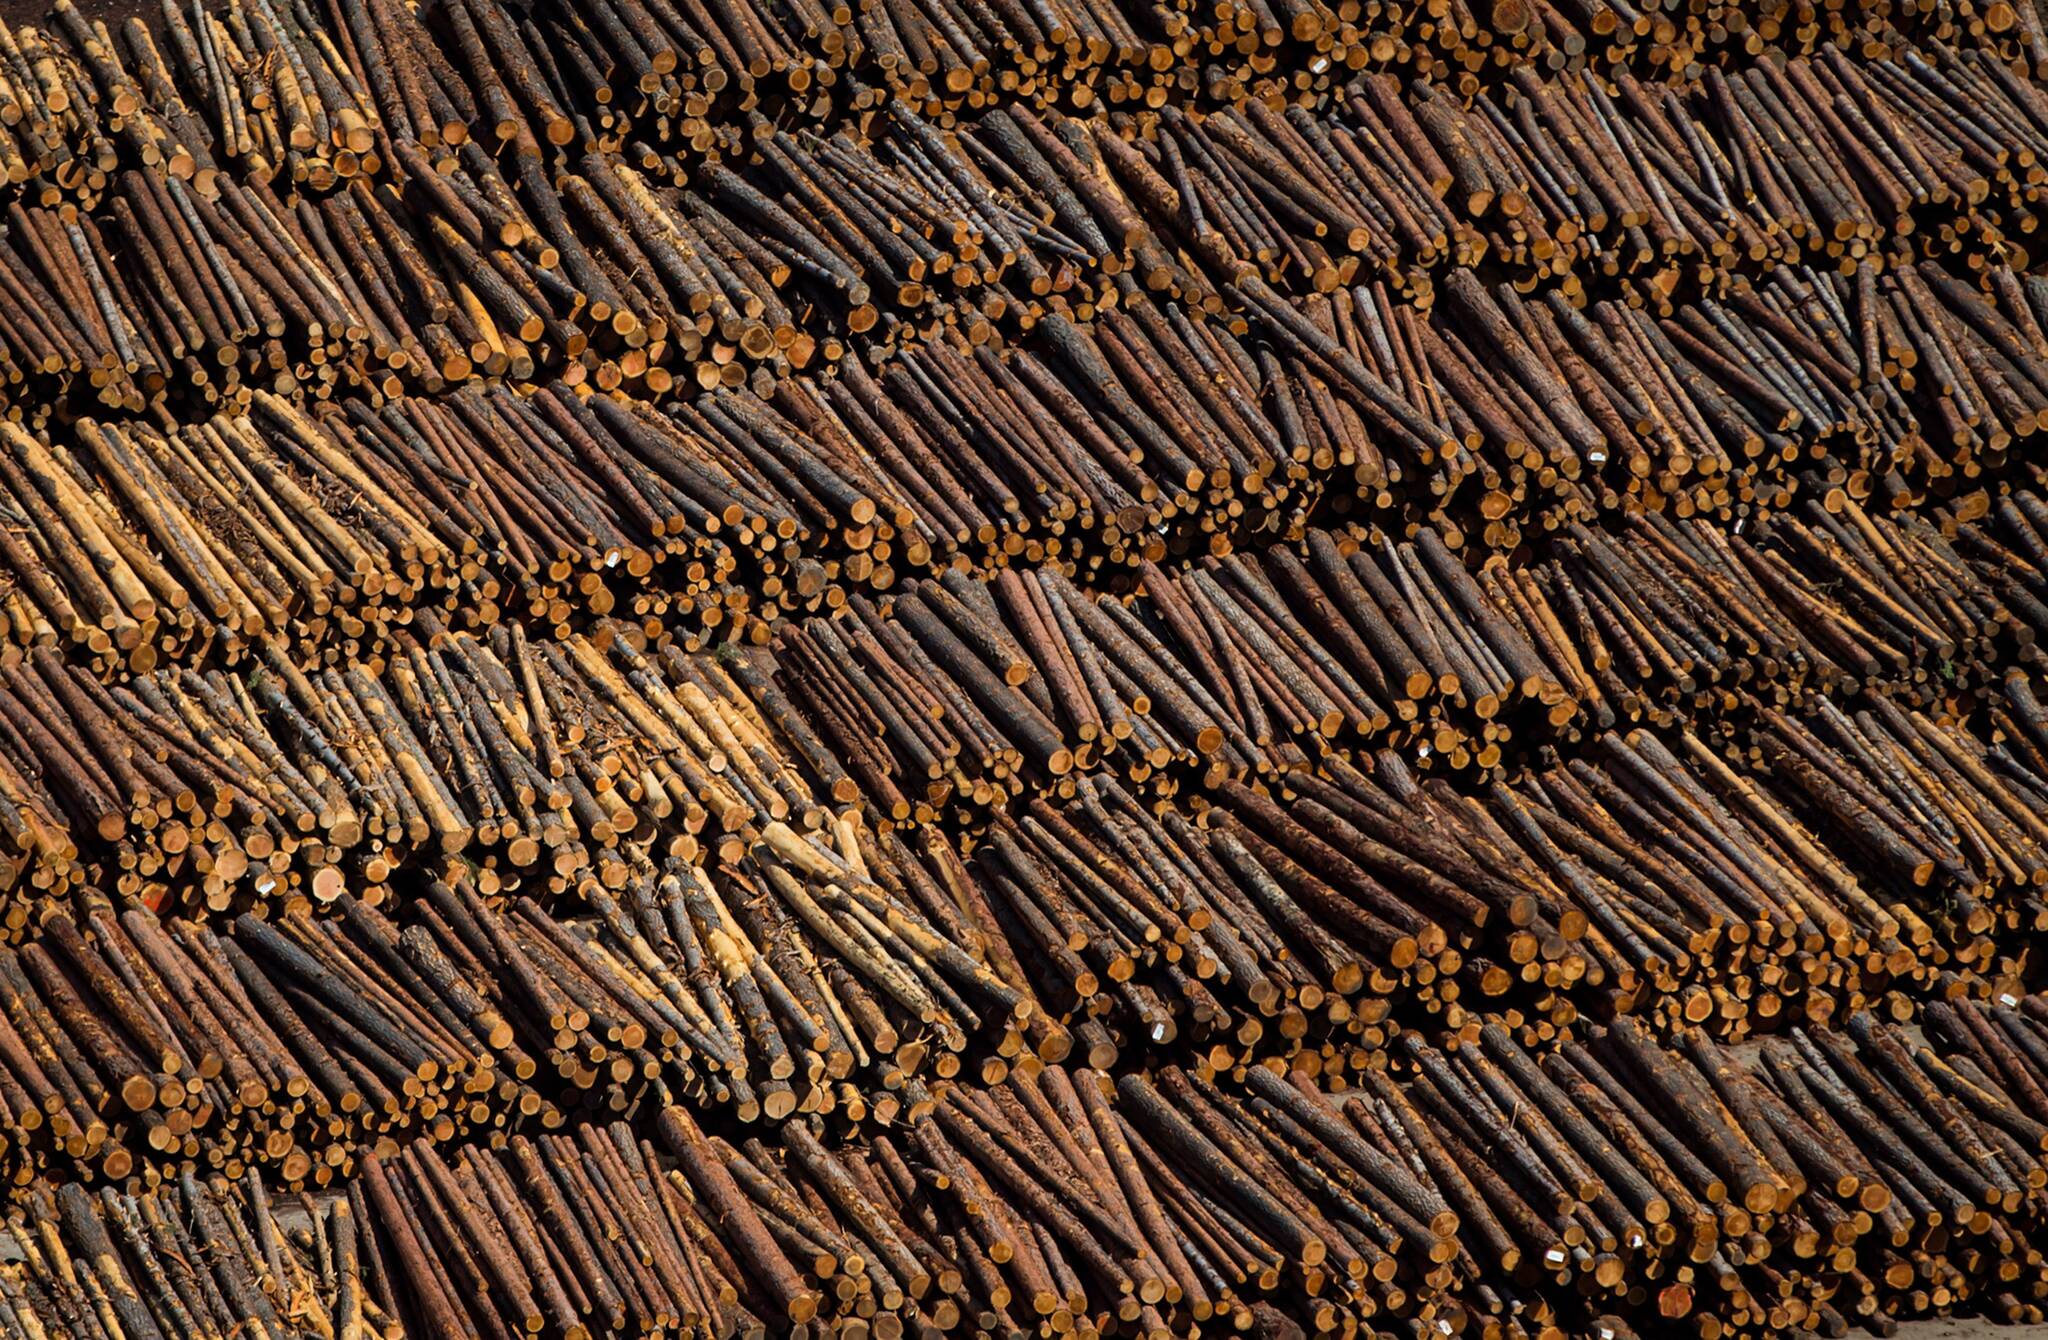 The many pressures on B.C.’s forests and the rural and northern communities that directly depend on them are coming to a head this spring, with sawmill, pellet and pulp closures set to affect hundreds of workers in different corners of the province. Logs are seen in an aerial view stacked at the Interfor sawmill, in Grand Forks, B.C., on May 12, 2018. THE CANADIAN PRESS/Darryl Dyck